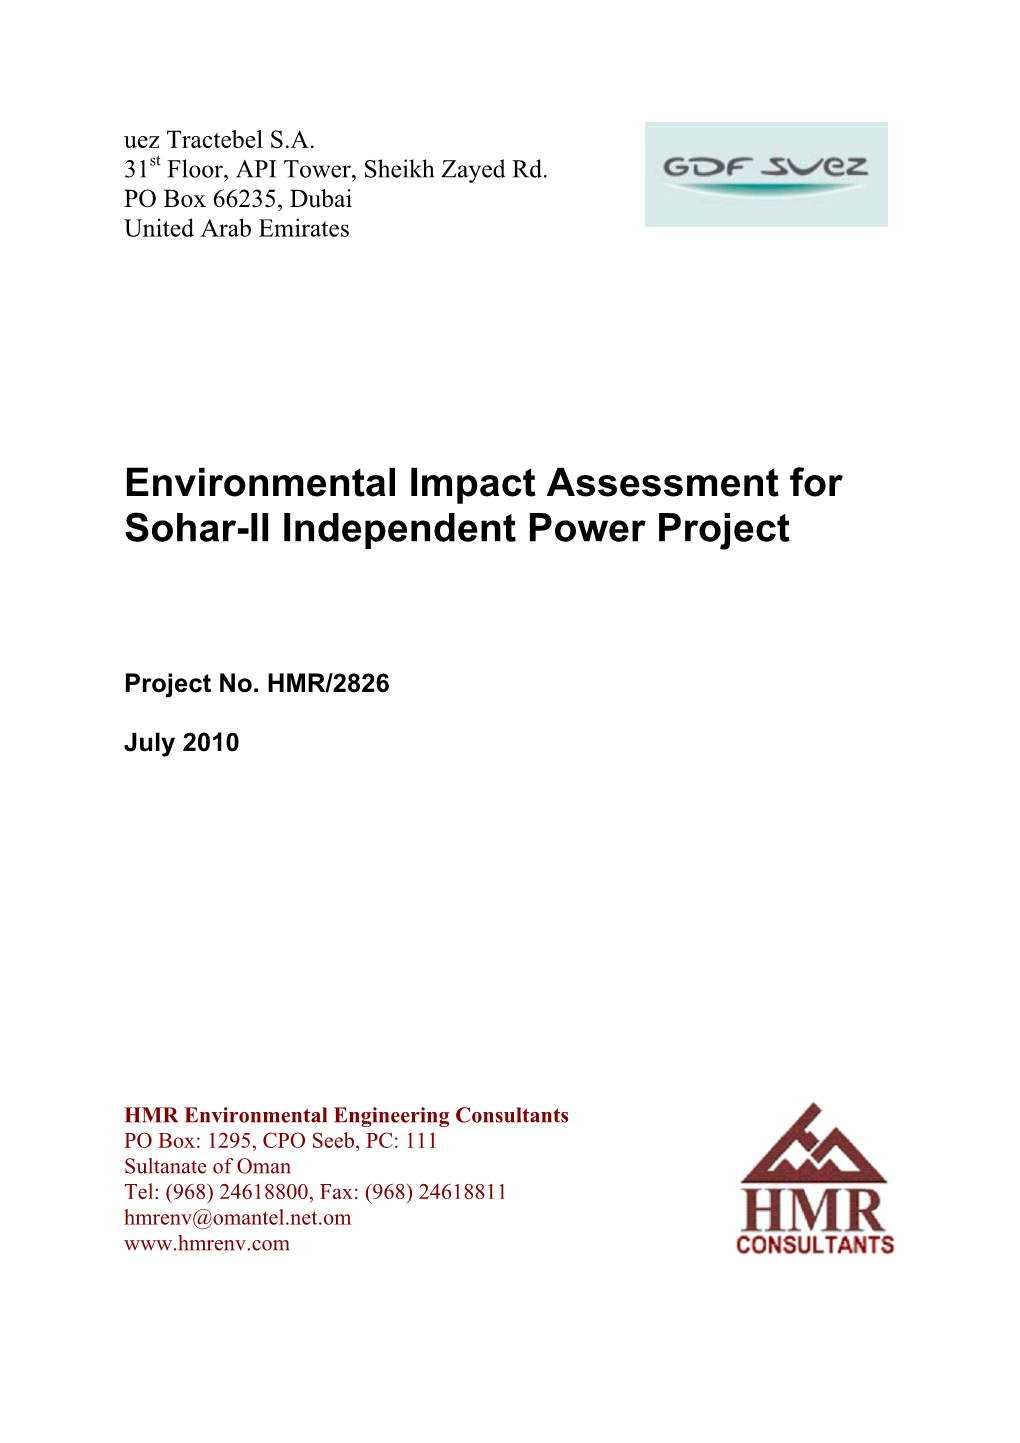 Environmental Impact Assessment for Sohar-II Independent Power Project